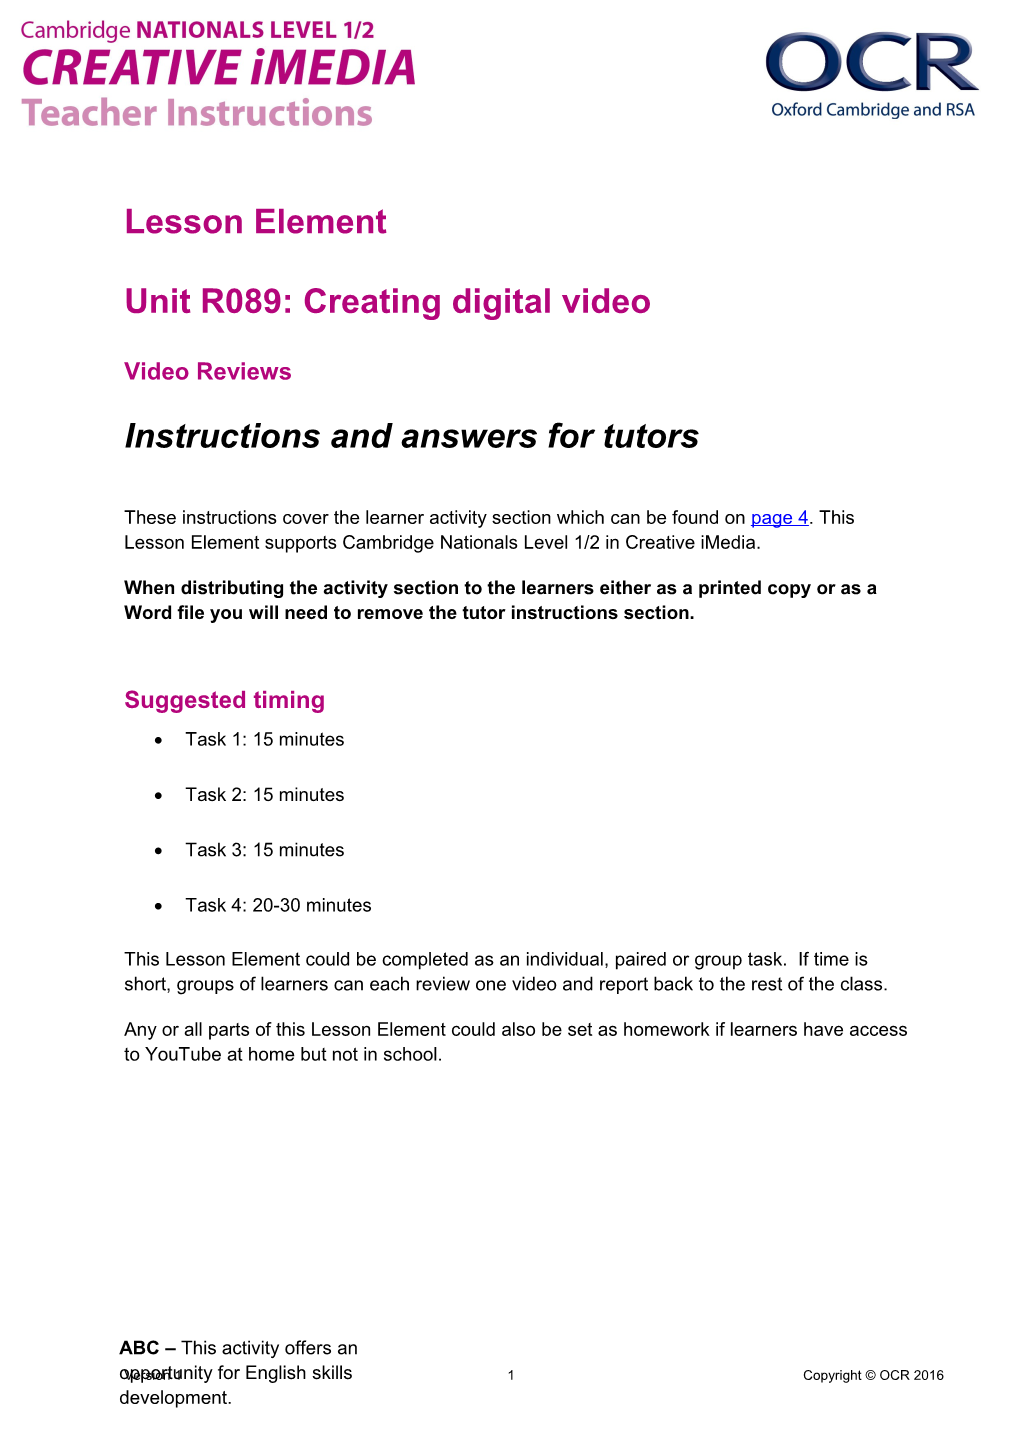 Cambridge Nationals in Creative Imedia Video Reviews Lesson Element